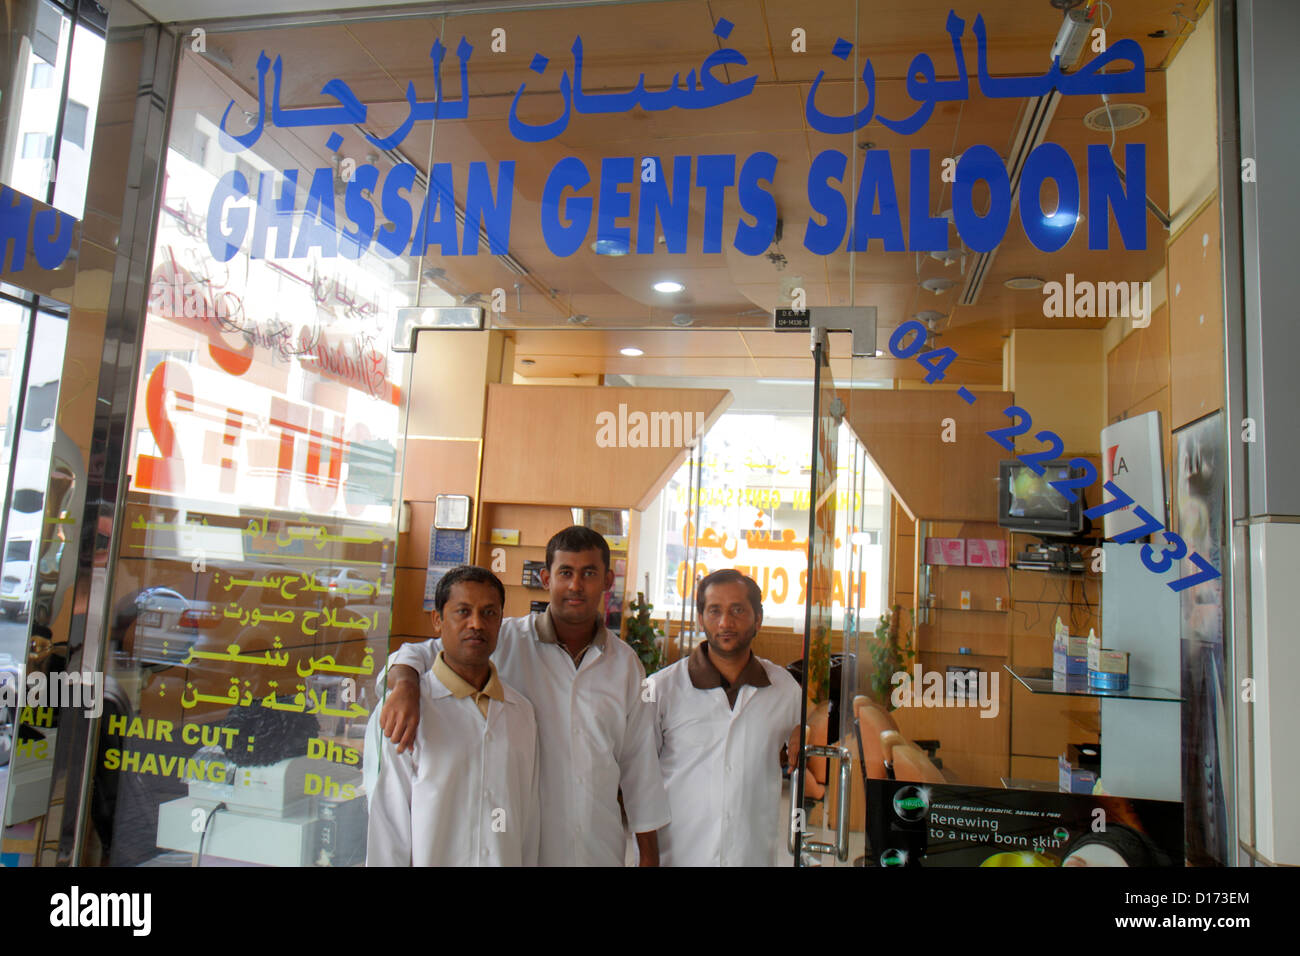 Dubai UAE,United Arab Emirates,Deira,Al Rigga,Ghassan Gents Saloon,barber,hair stylist,migrant worker,workers,foreign laborer,labor,labour,resident,re Stock Photo